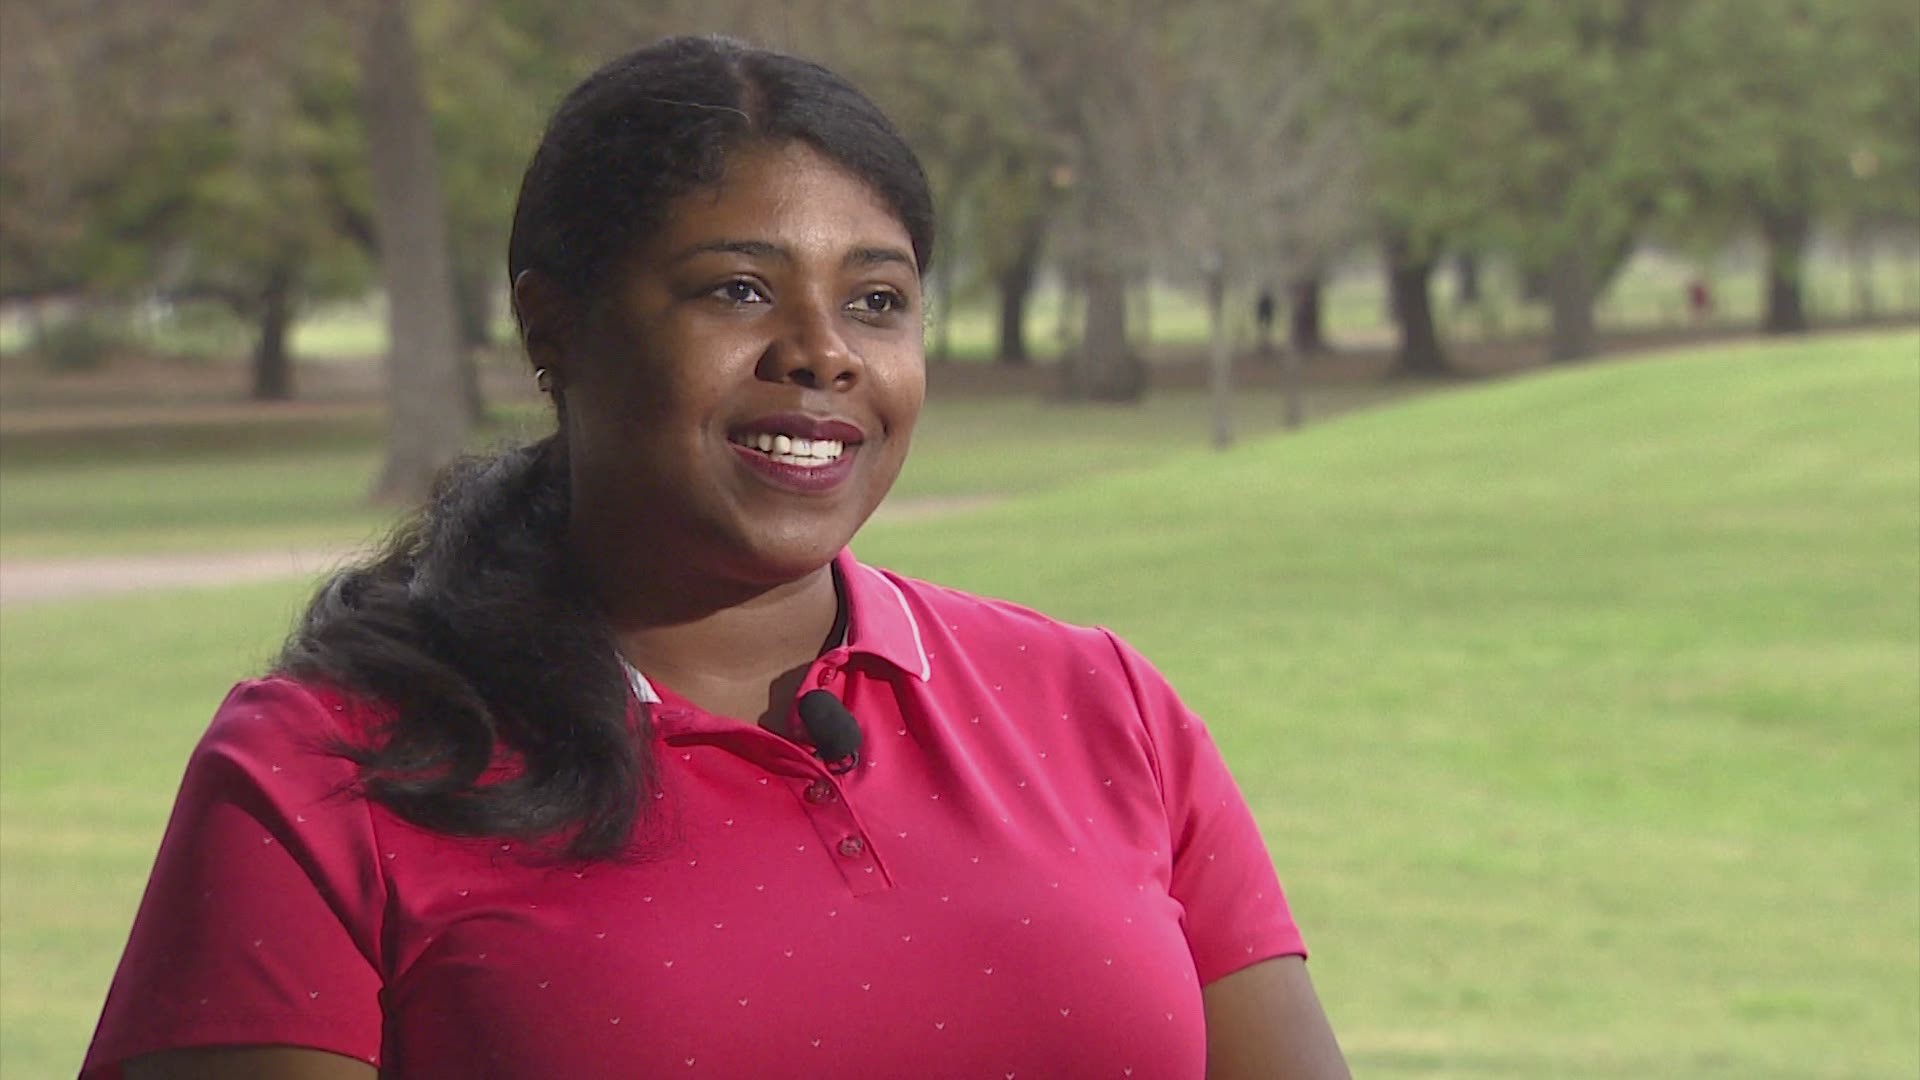 The Professional Golfers' Association of America announced that Dotch is the first and only Black woman and PGA member to hold that position in the country.